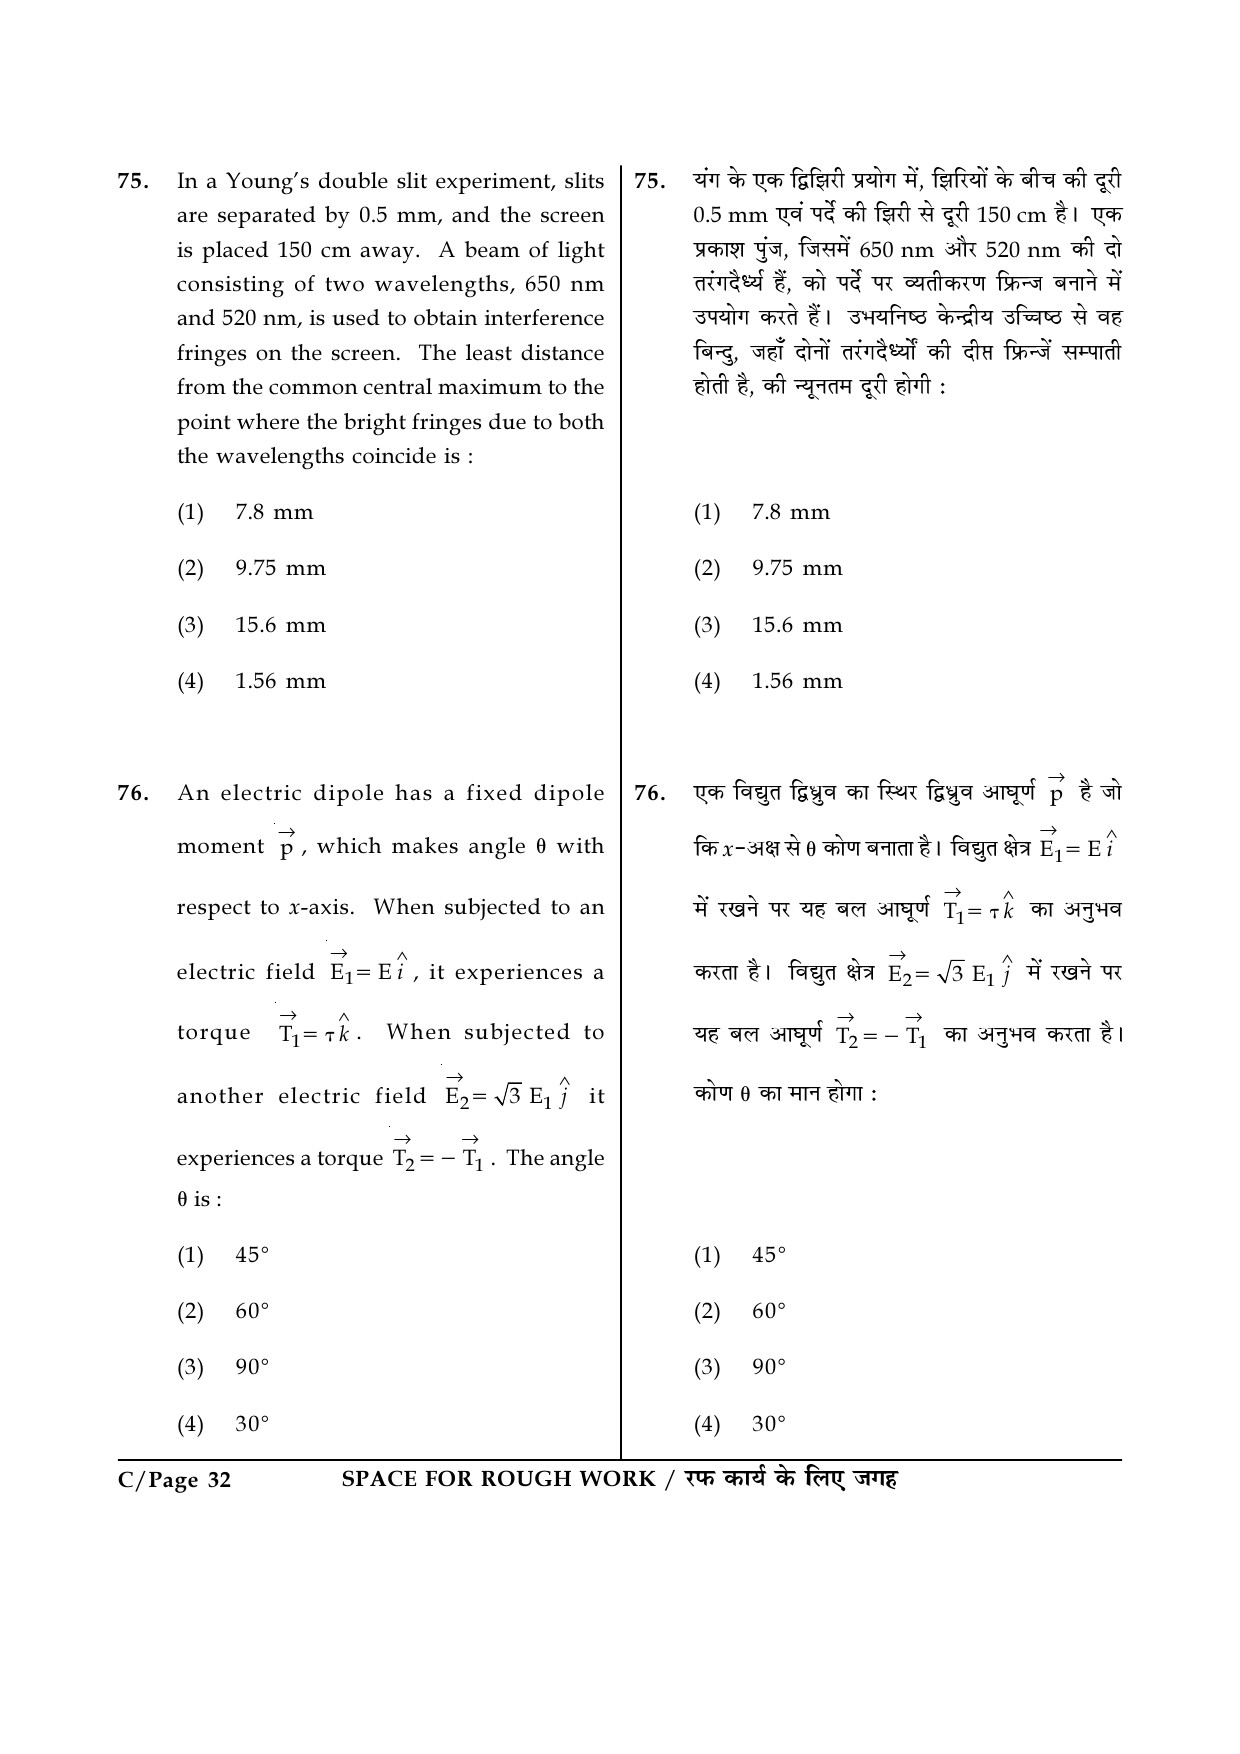 JEE Main Exam Question Paper 2017 Booklet C 32